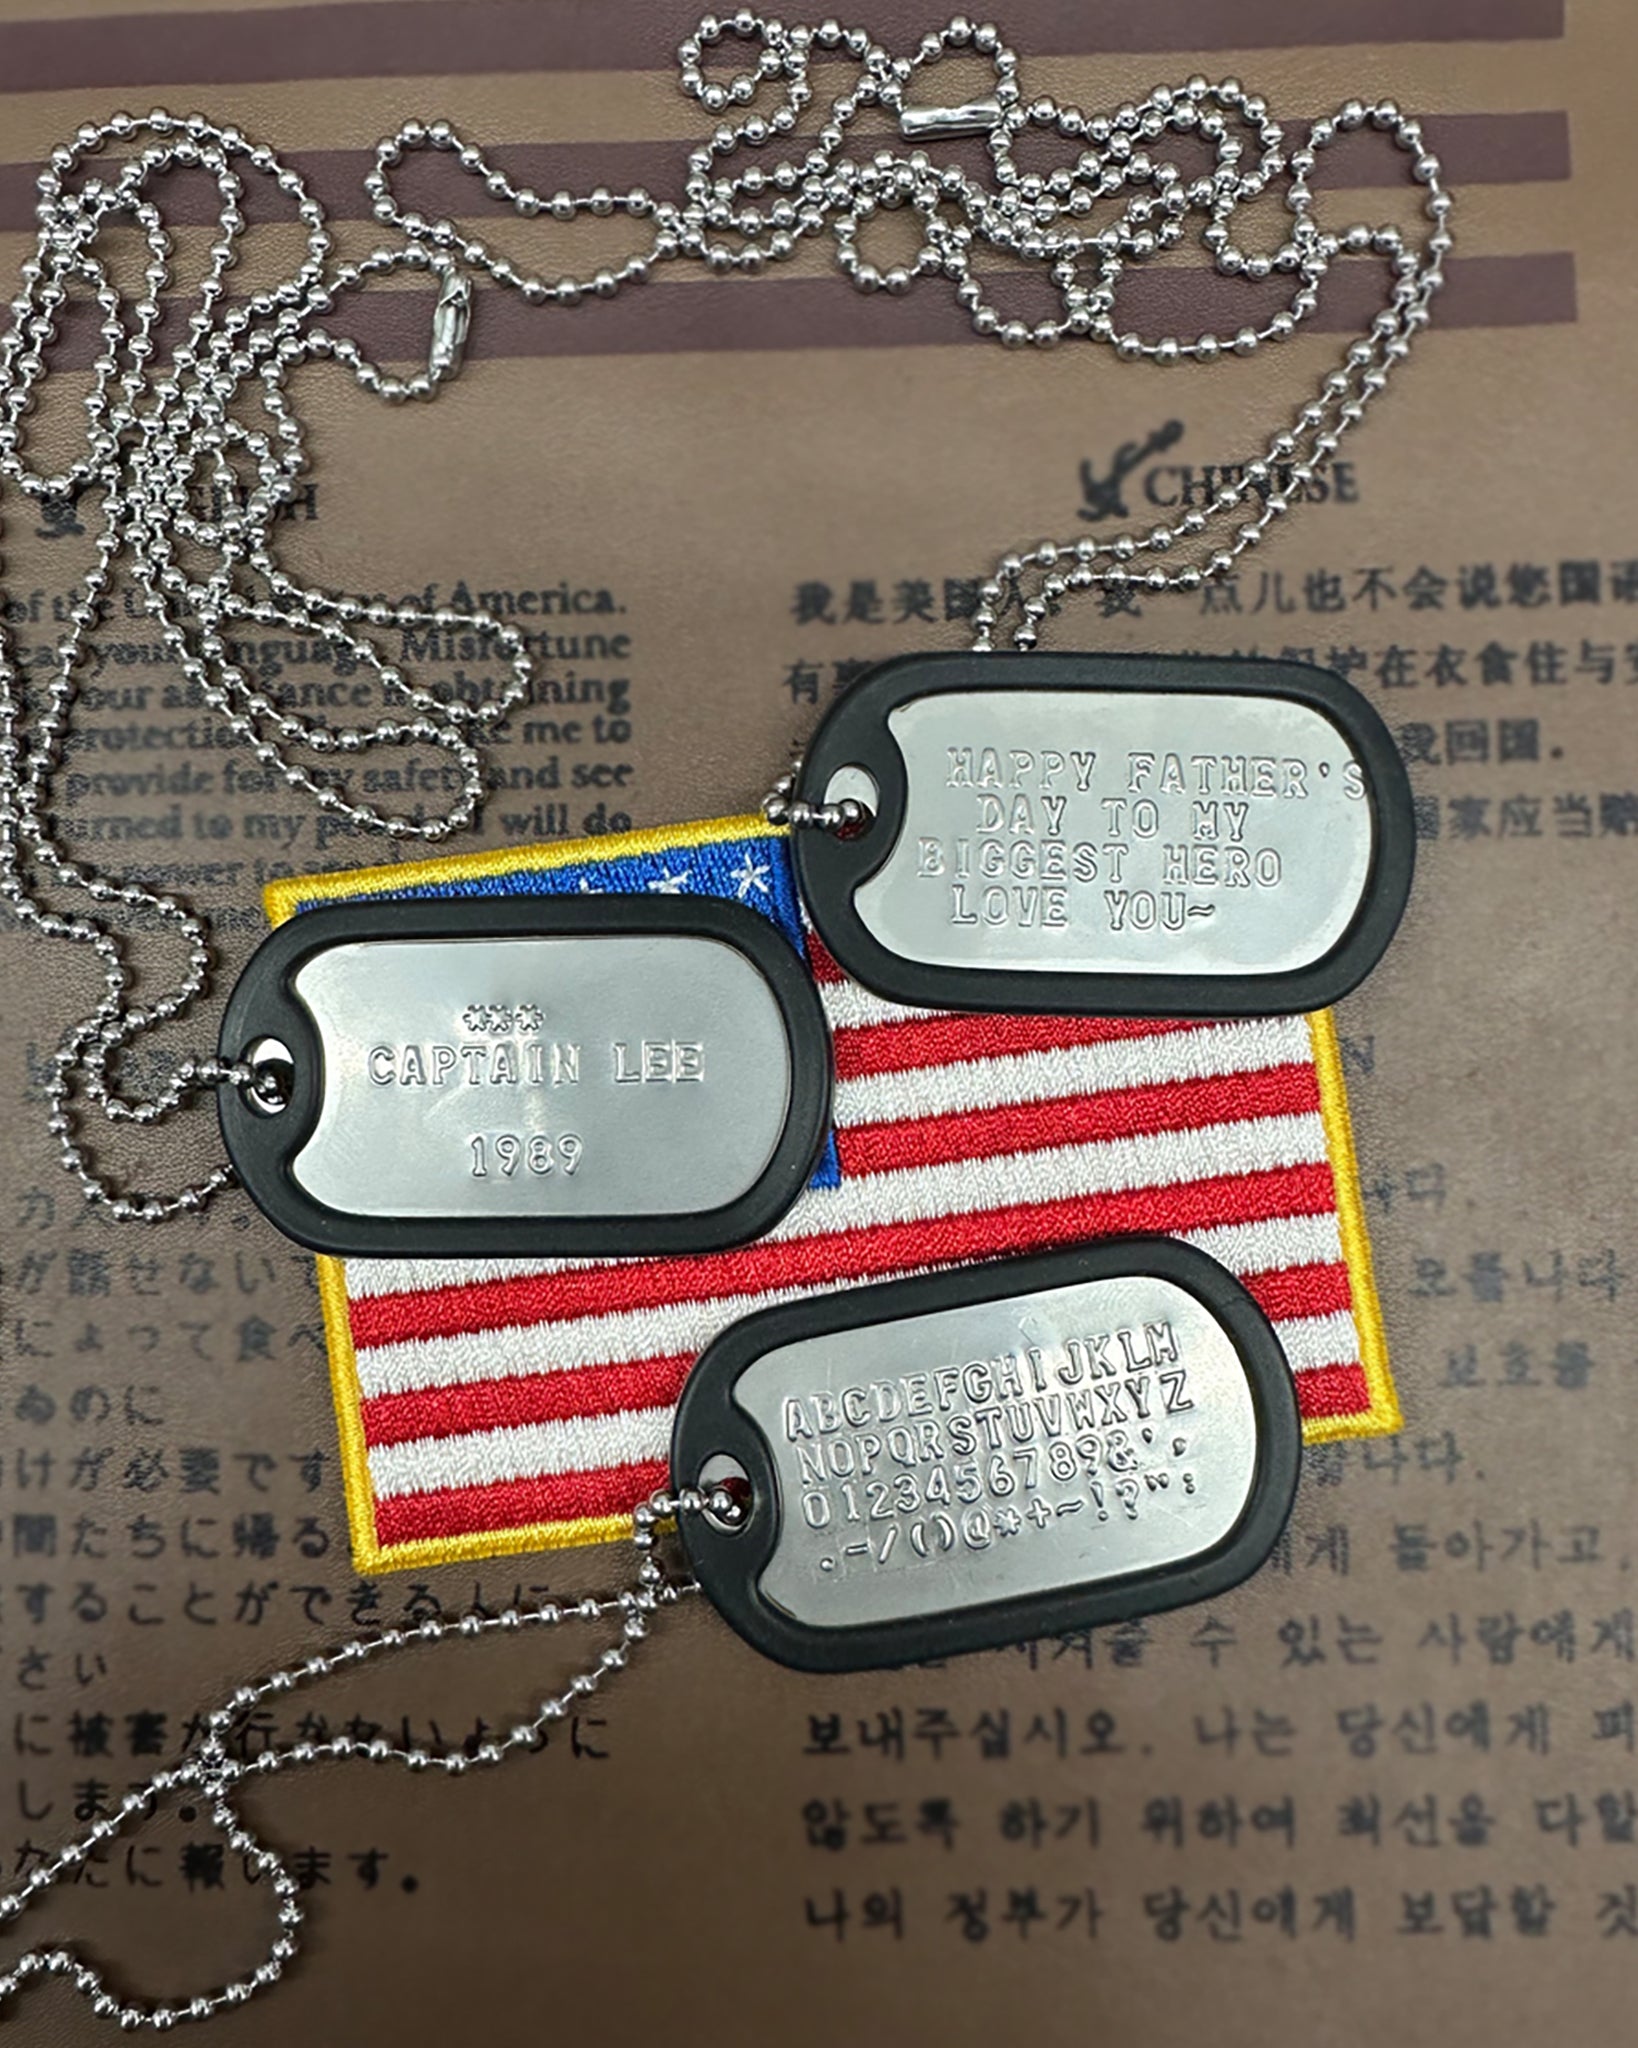 New Necklace Soldier Military Dog Tags Ball Chain Army Bullet Pendants Acc  | eBay